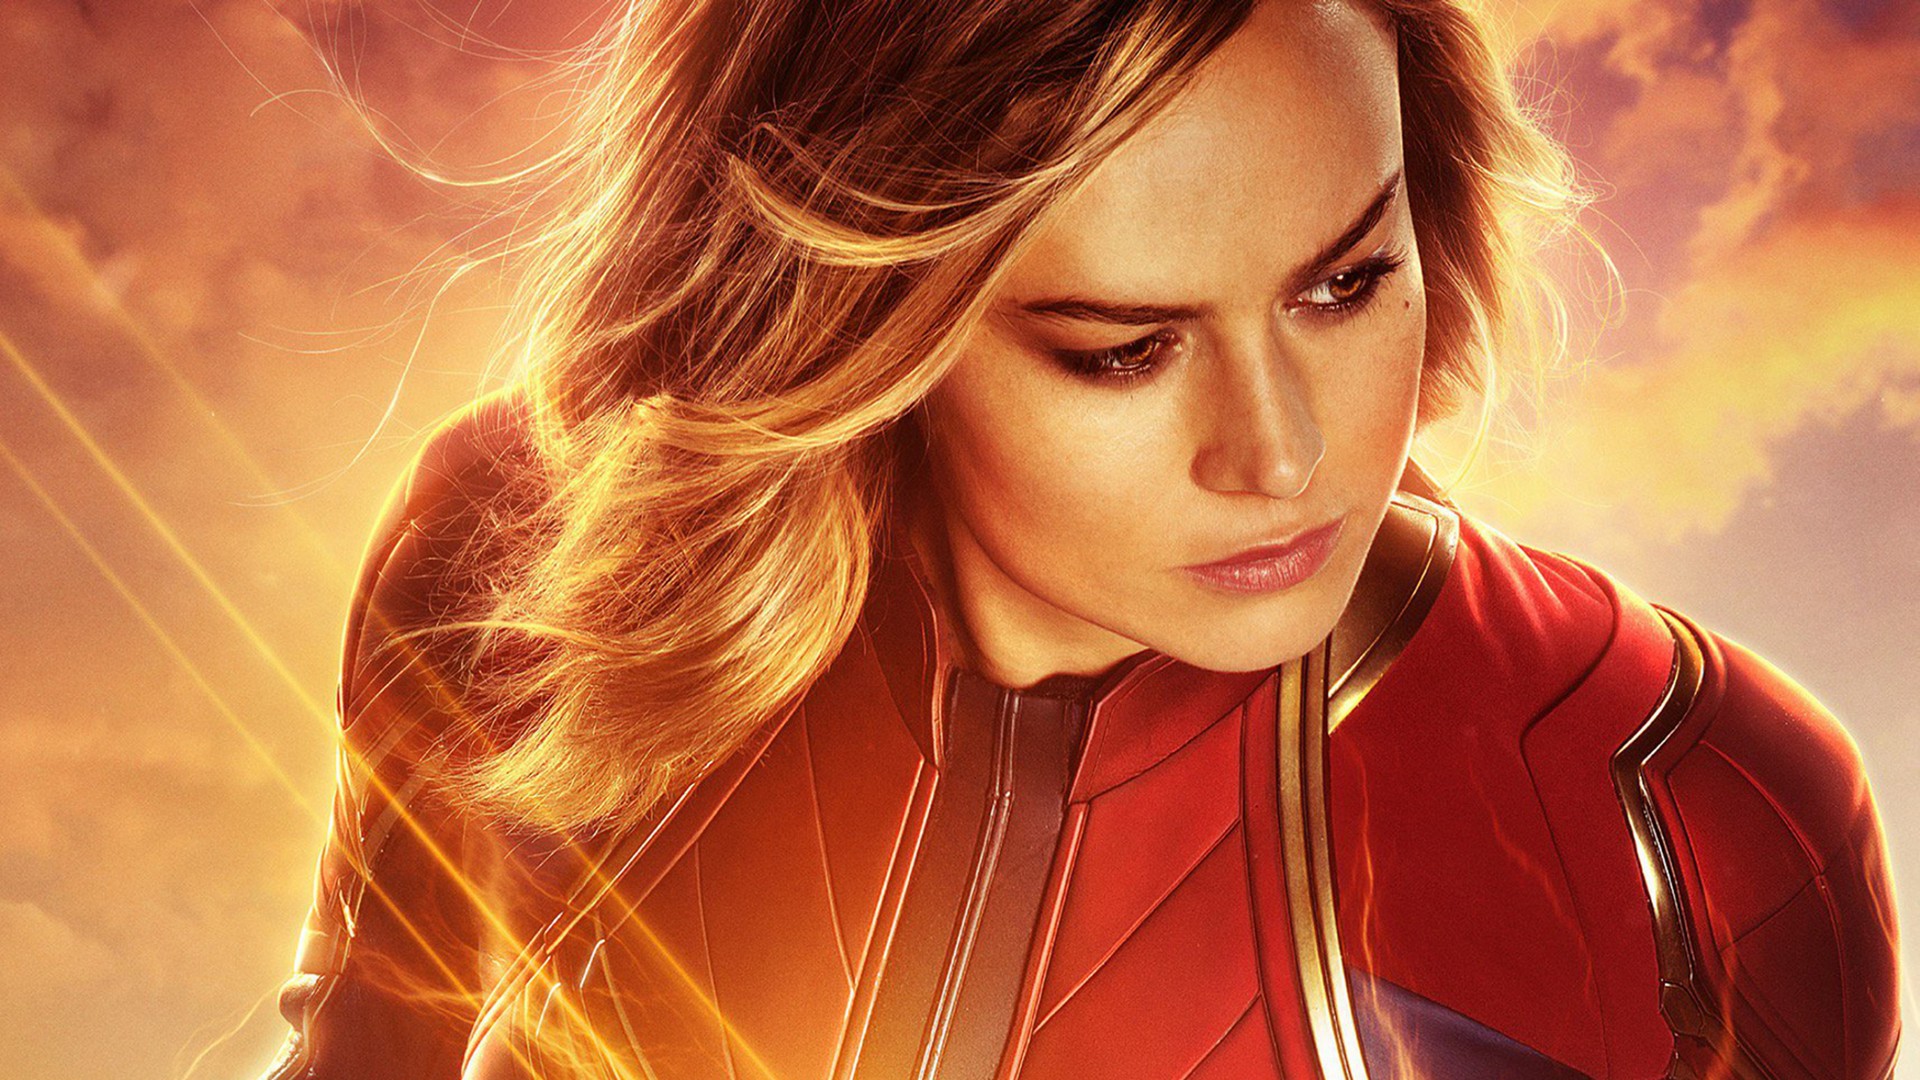 Wallpapers Captain Marvel 2019 with high-resolution 1920x1080 pixel. You can use this poster wallpaper for your Desktop Computers, Mac Screensavers, Windows Backgrounds, iPhone Wallpapers, Tablet or Android Lock screen and another Mobile device